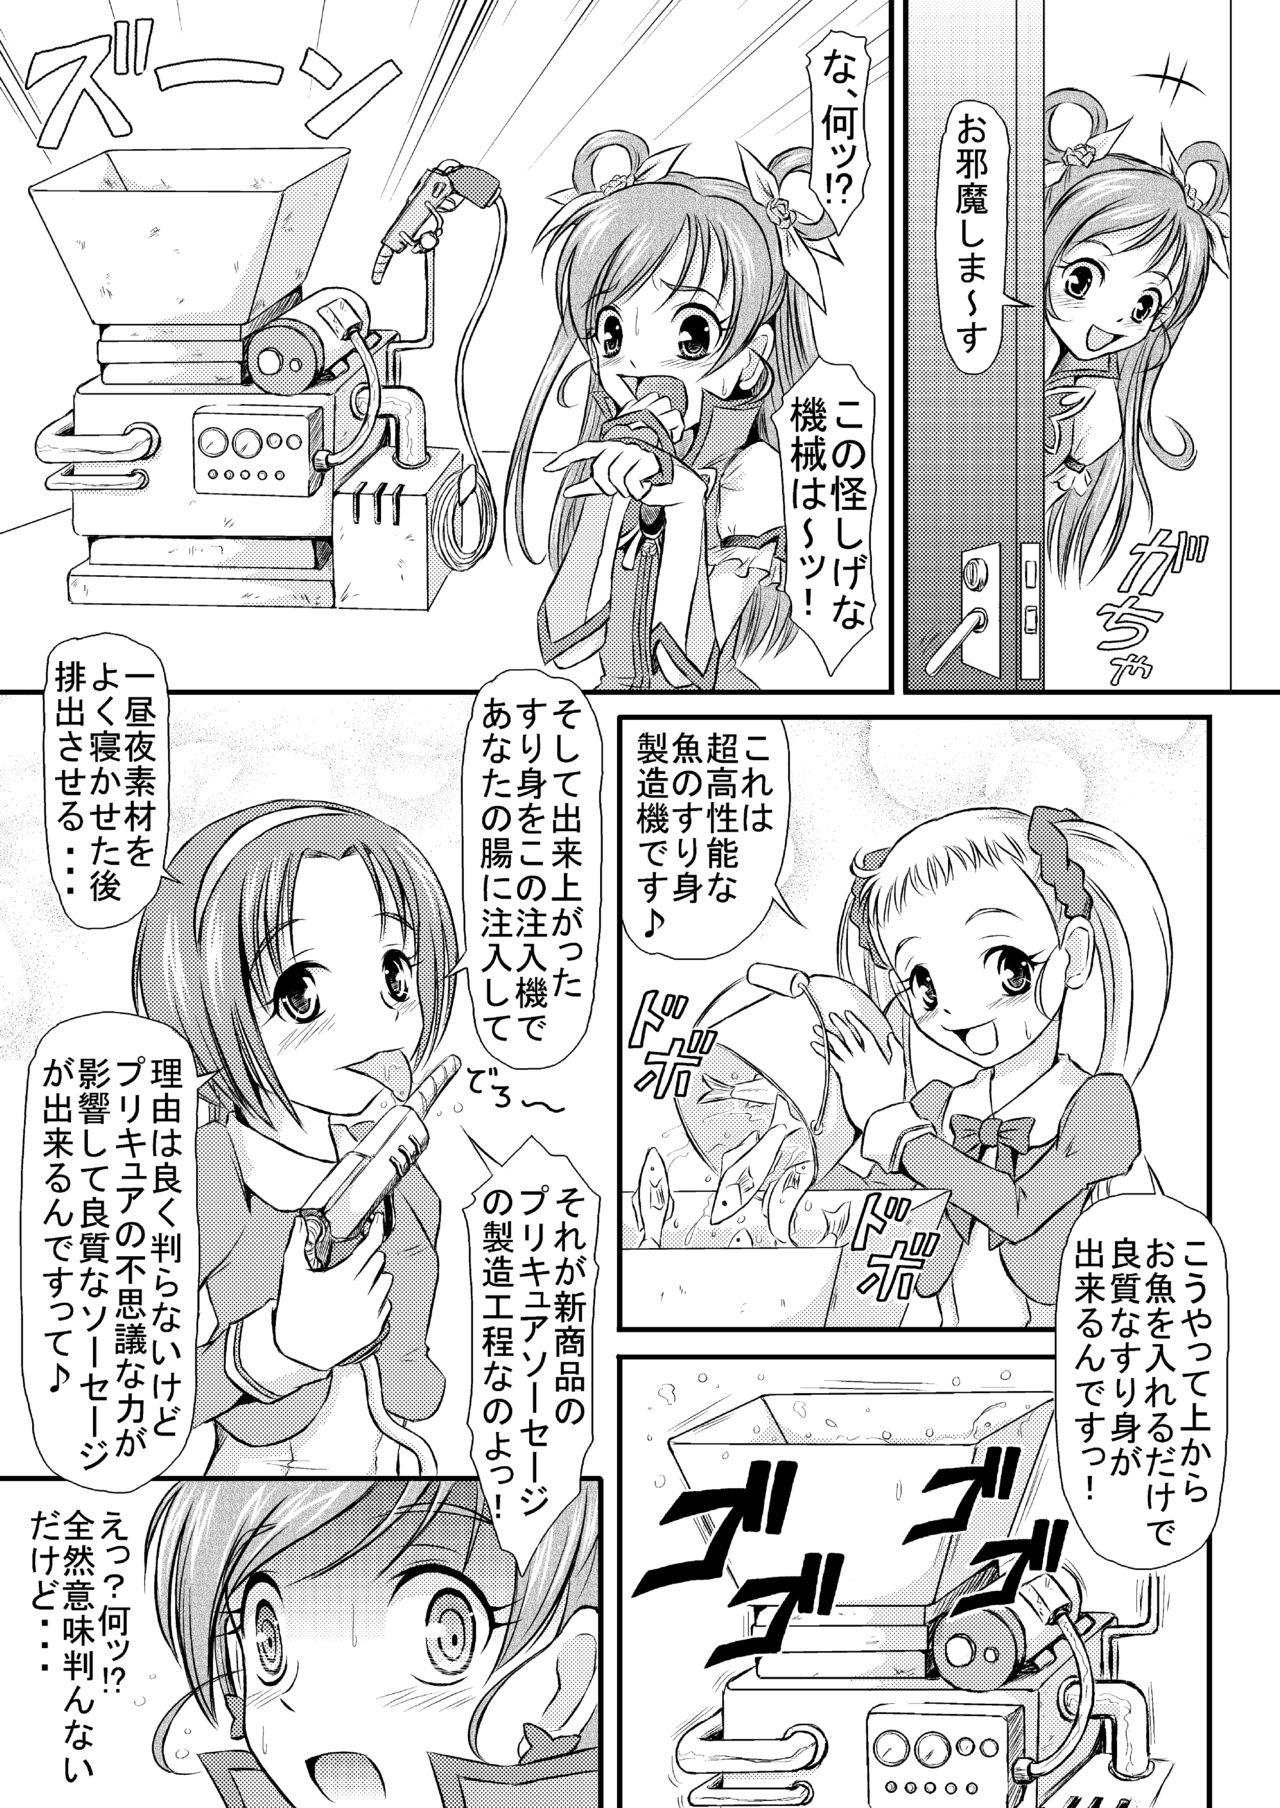 Squirting Sausage no Himitsu - Yes precure 5 Officesex - Page 4